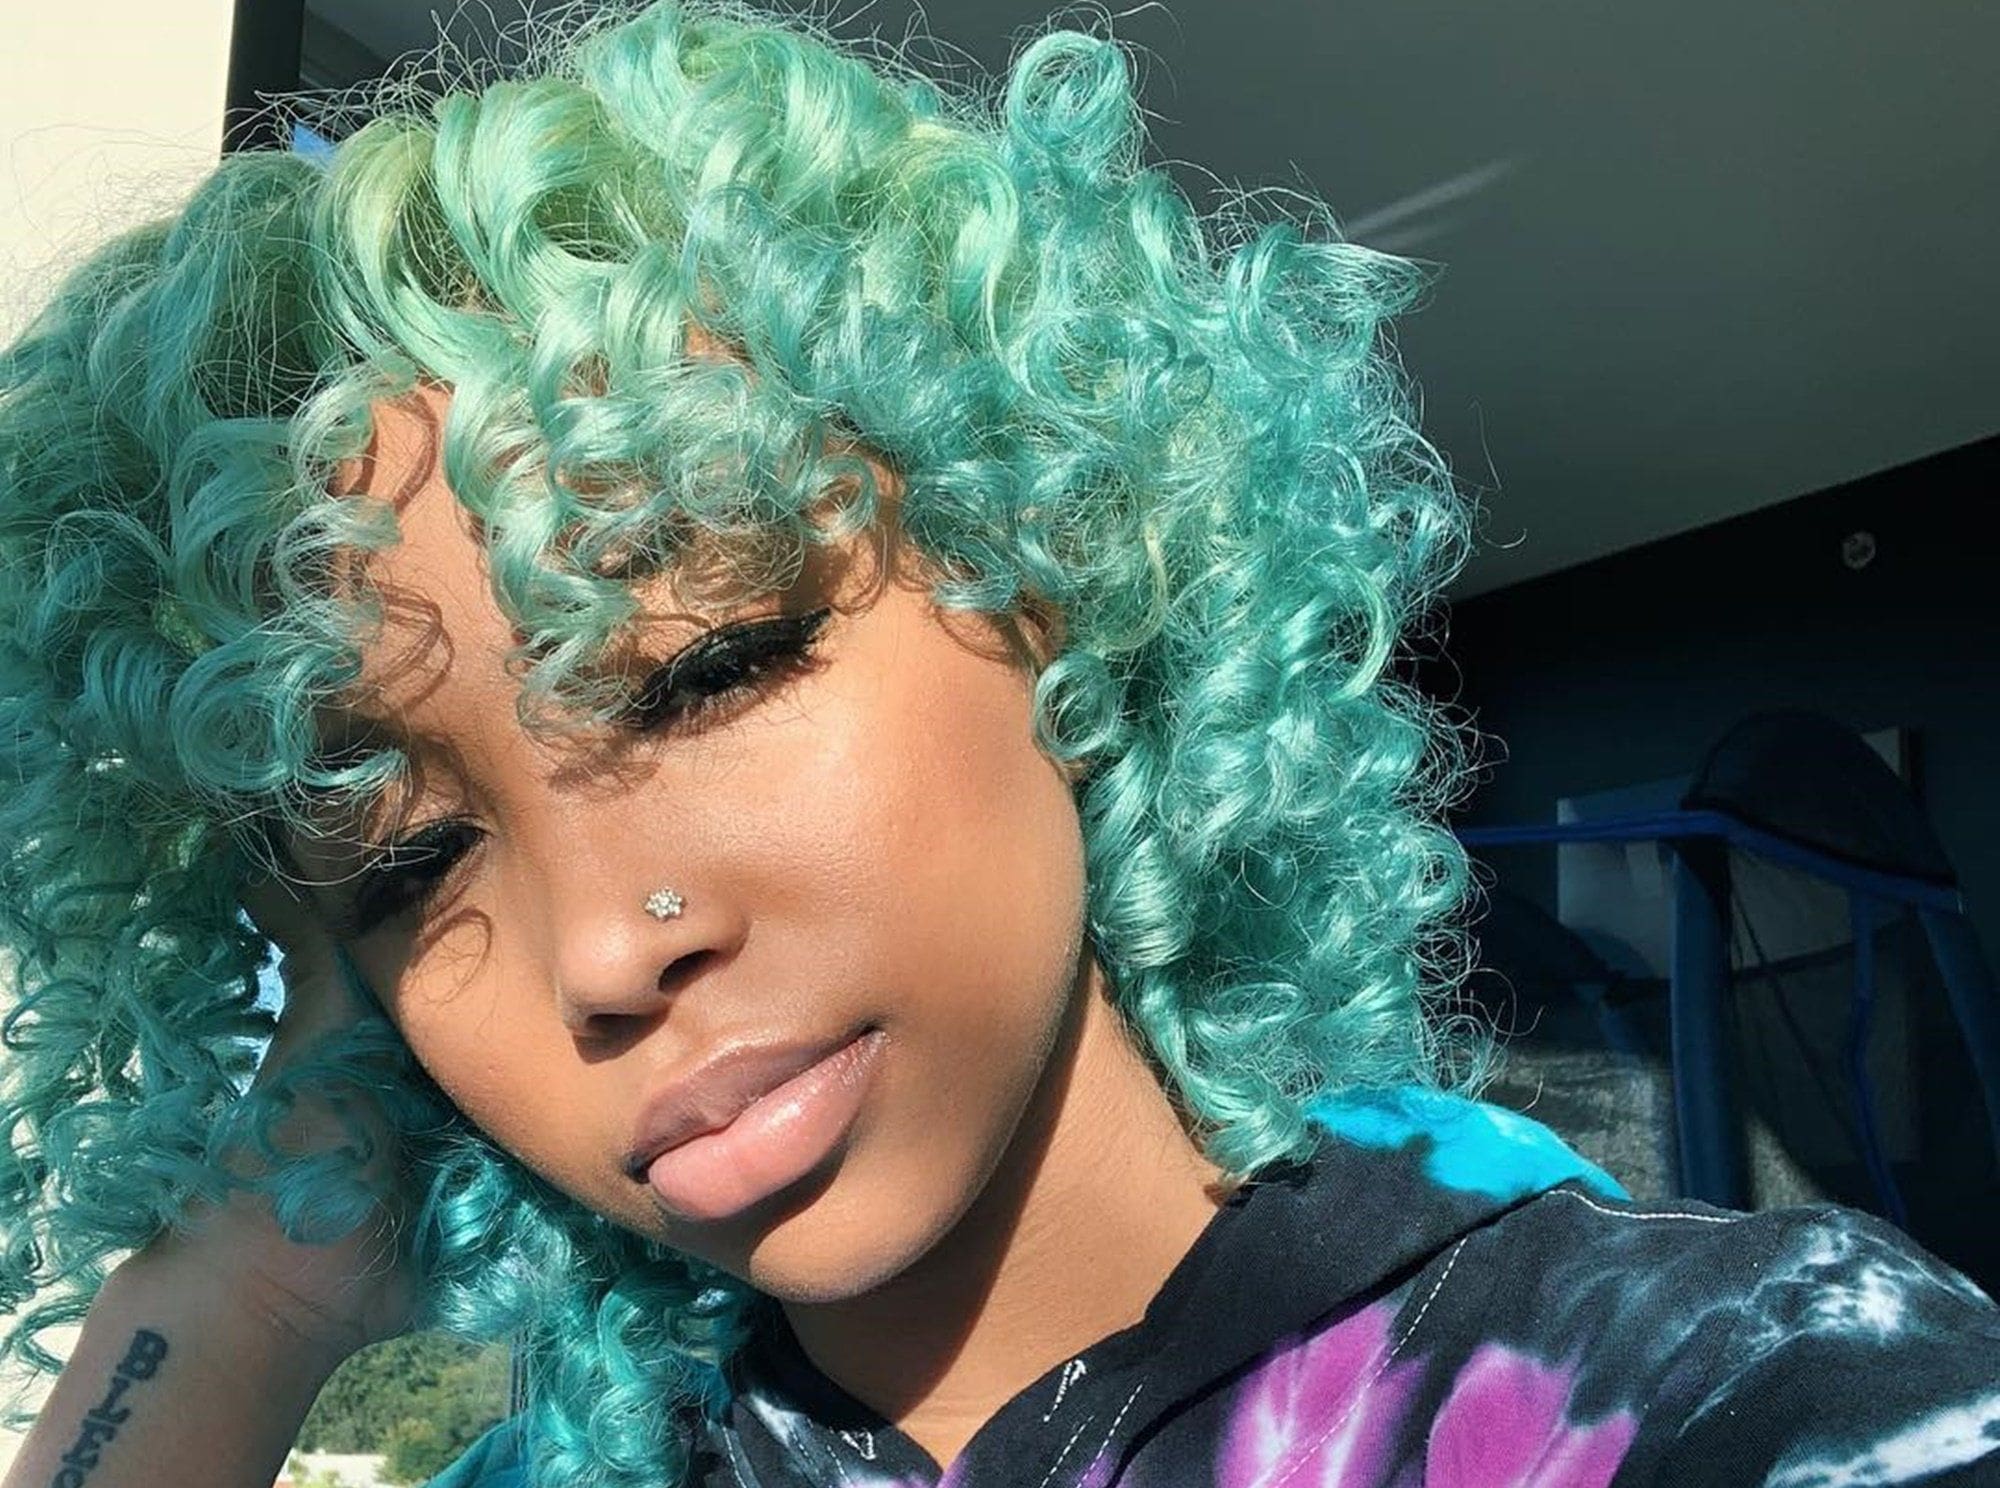 Tiny Harris' Daughter, Zonnique Pullins Changes Her Look - Check Out Her New Hair